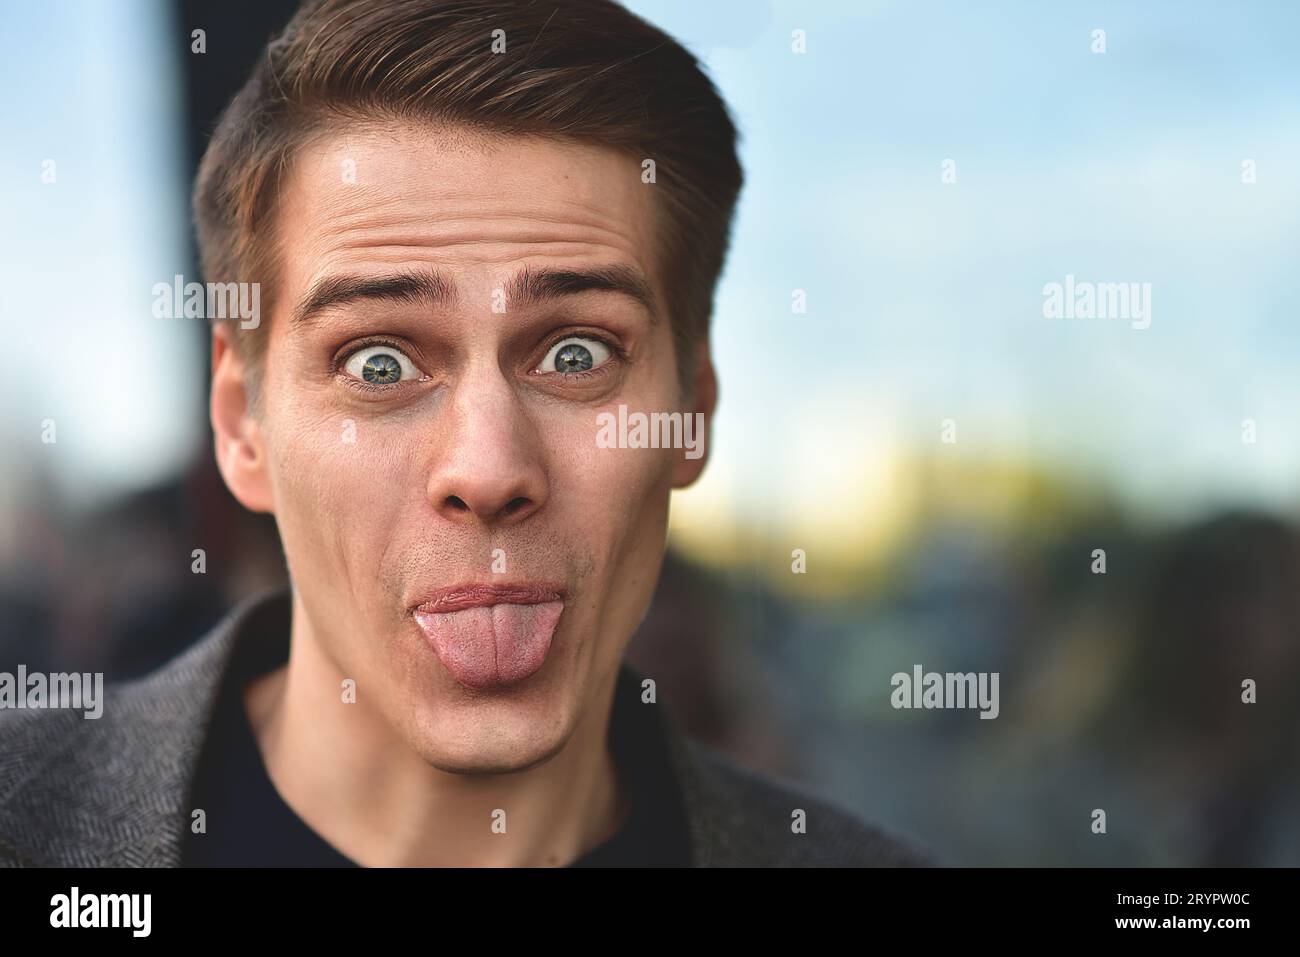 Portrait of stylish happy handsome young man standing outdoors. Stock Photo